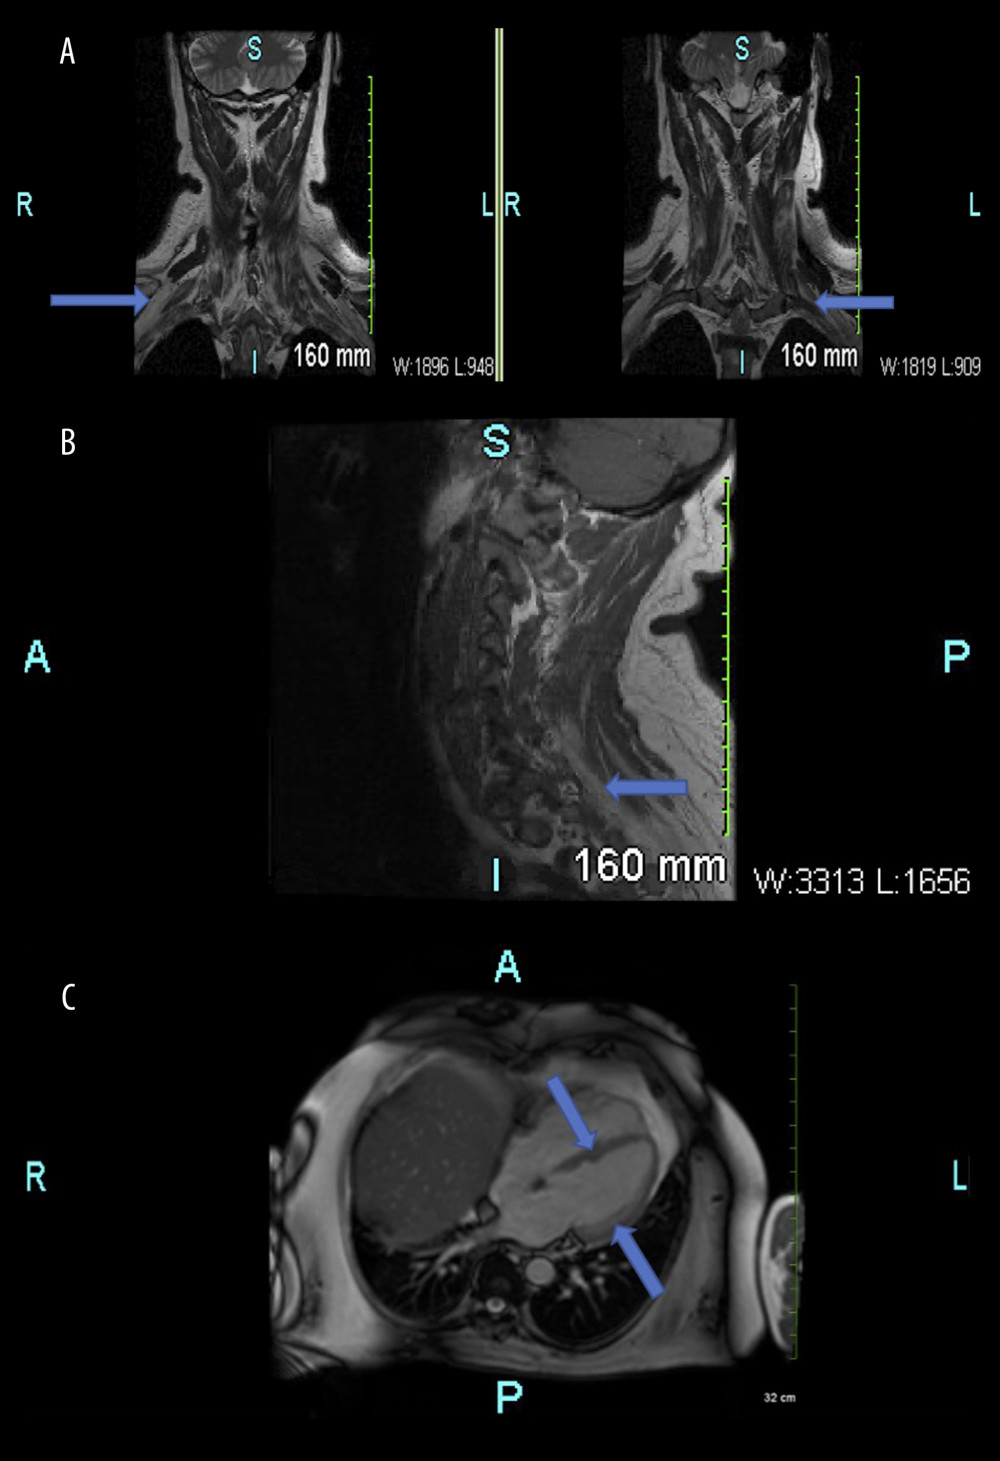 (A) Coronal T2 section showing fibrofatty infiltration of proximal muscles (arrows). (B) Sagittal T2 section showing fibrofatty changes in the paraspinal muscles (arrow). (C) Cross sectional T2 image showing biventricular dilation with fibrosis in the basal septum and inferolateral wall (arrows) of the heart.